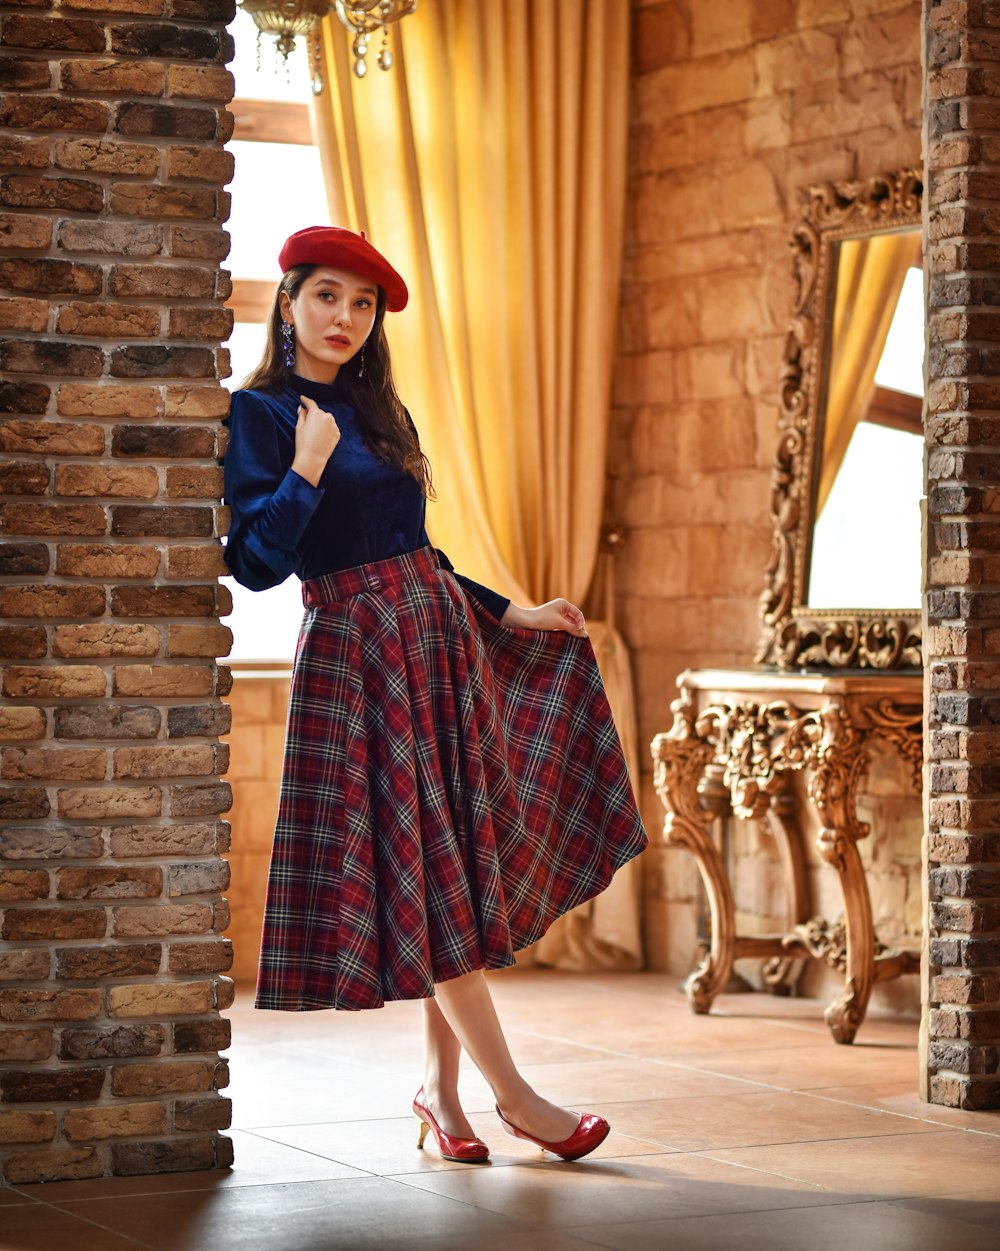 a woman in a blue top and a red plaid skirt